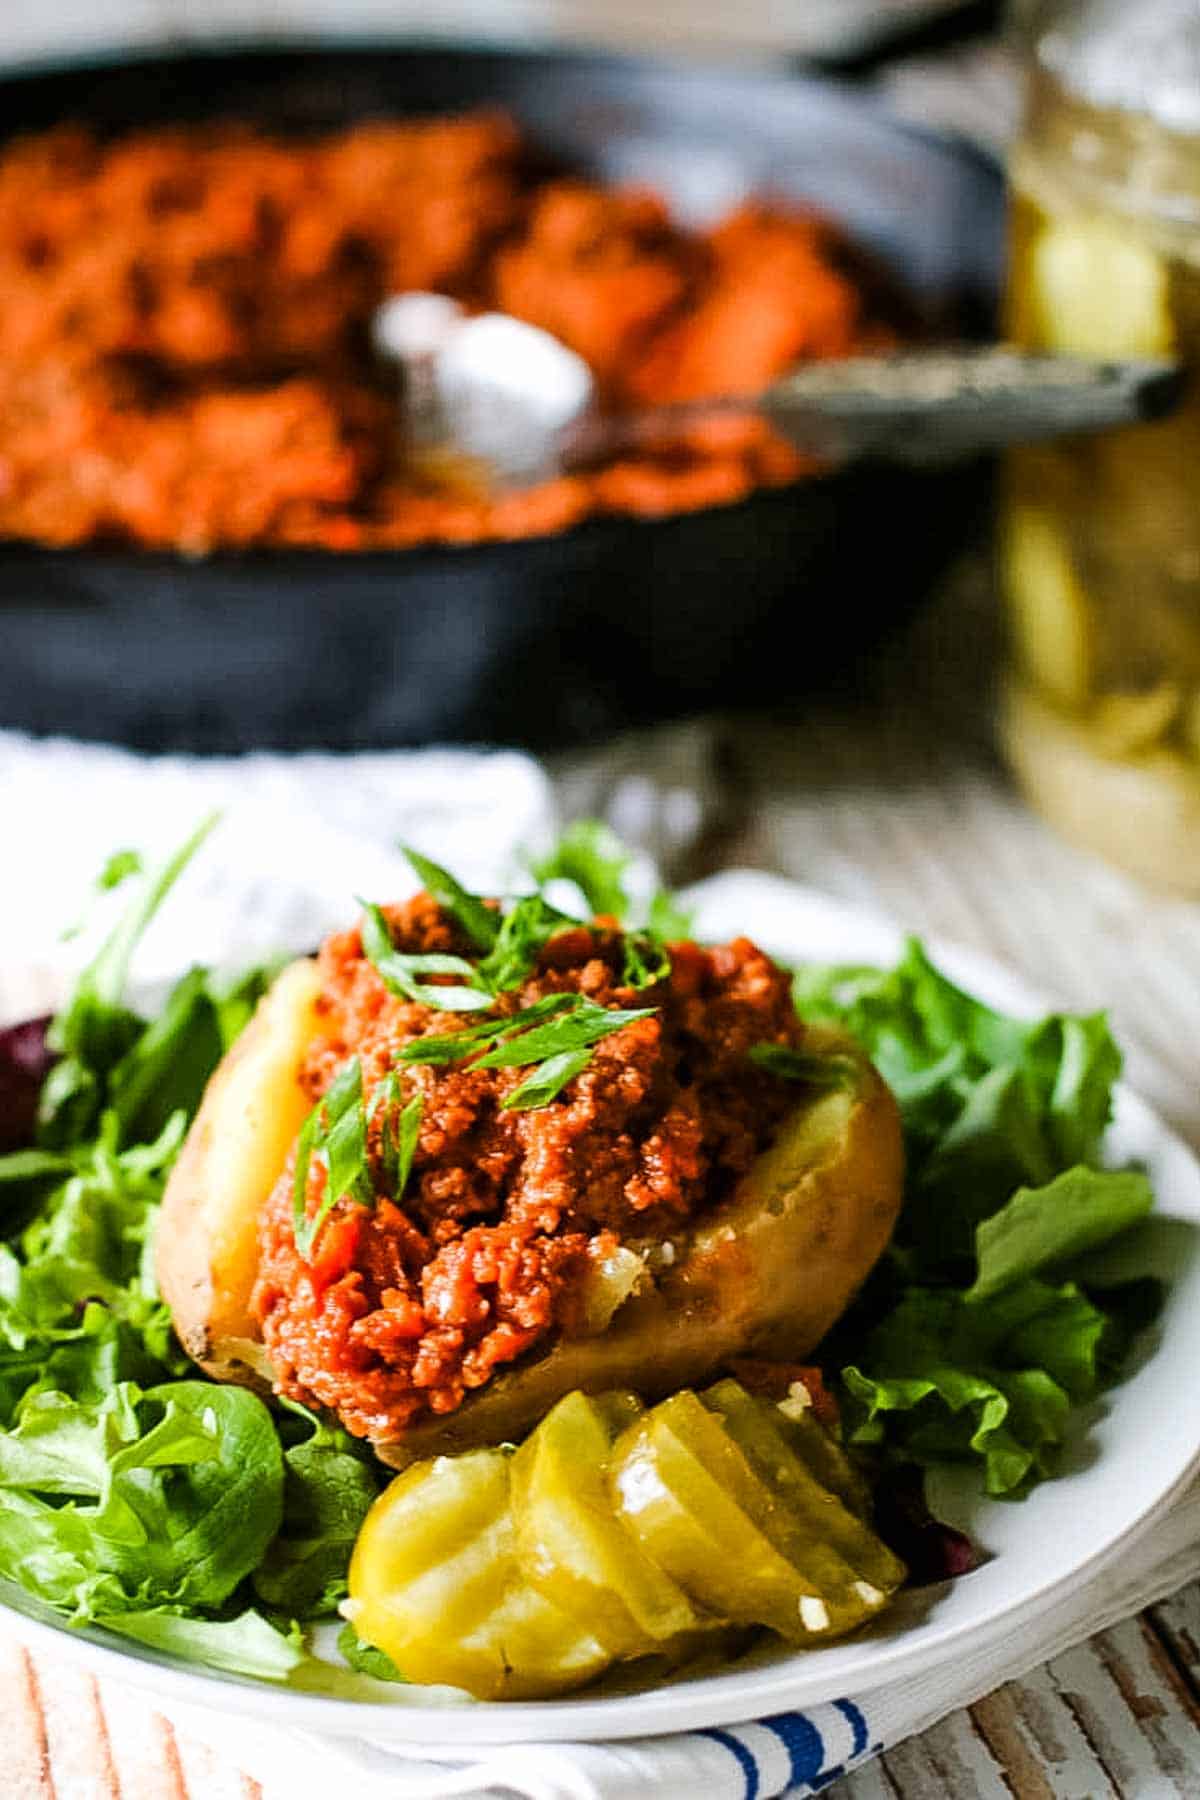 Sloppy joes on sweet potatoes with pickles.